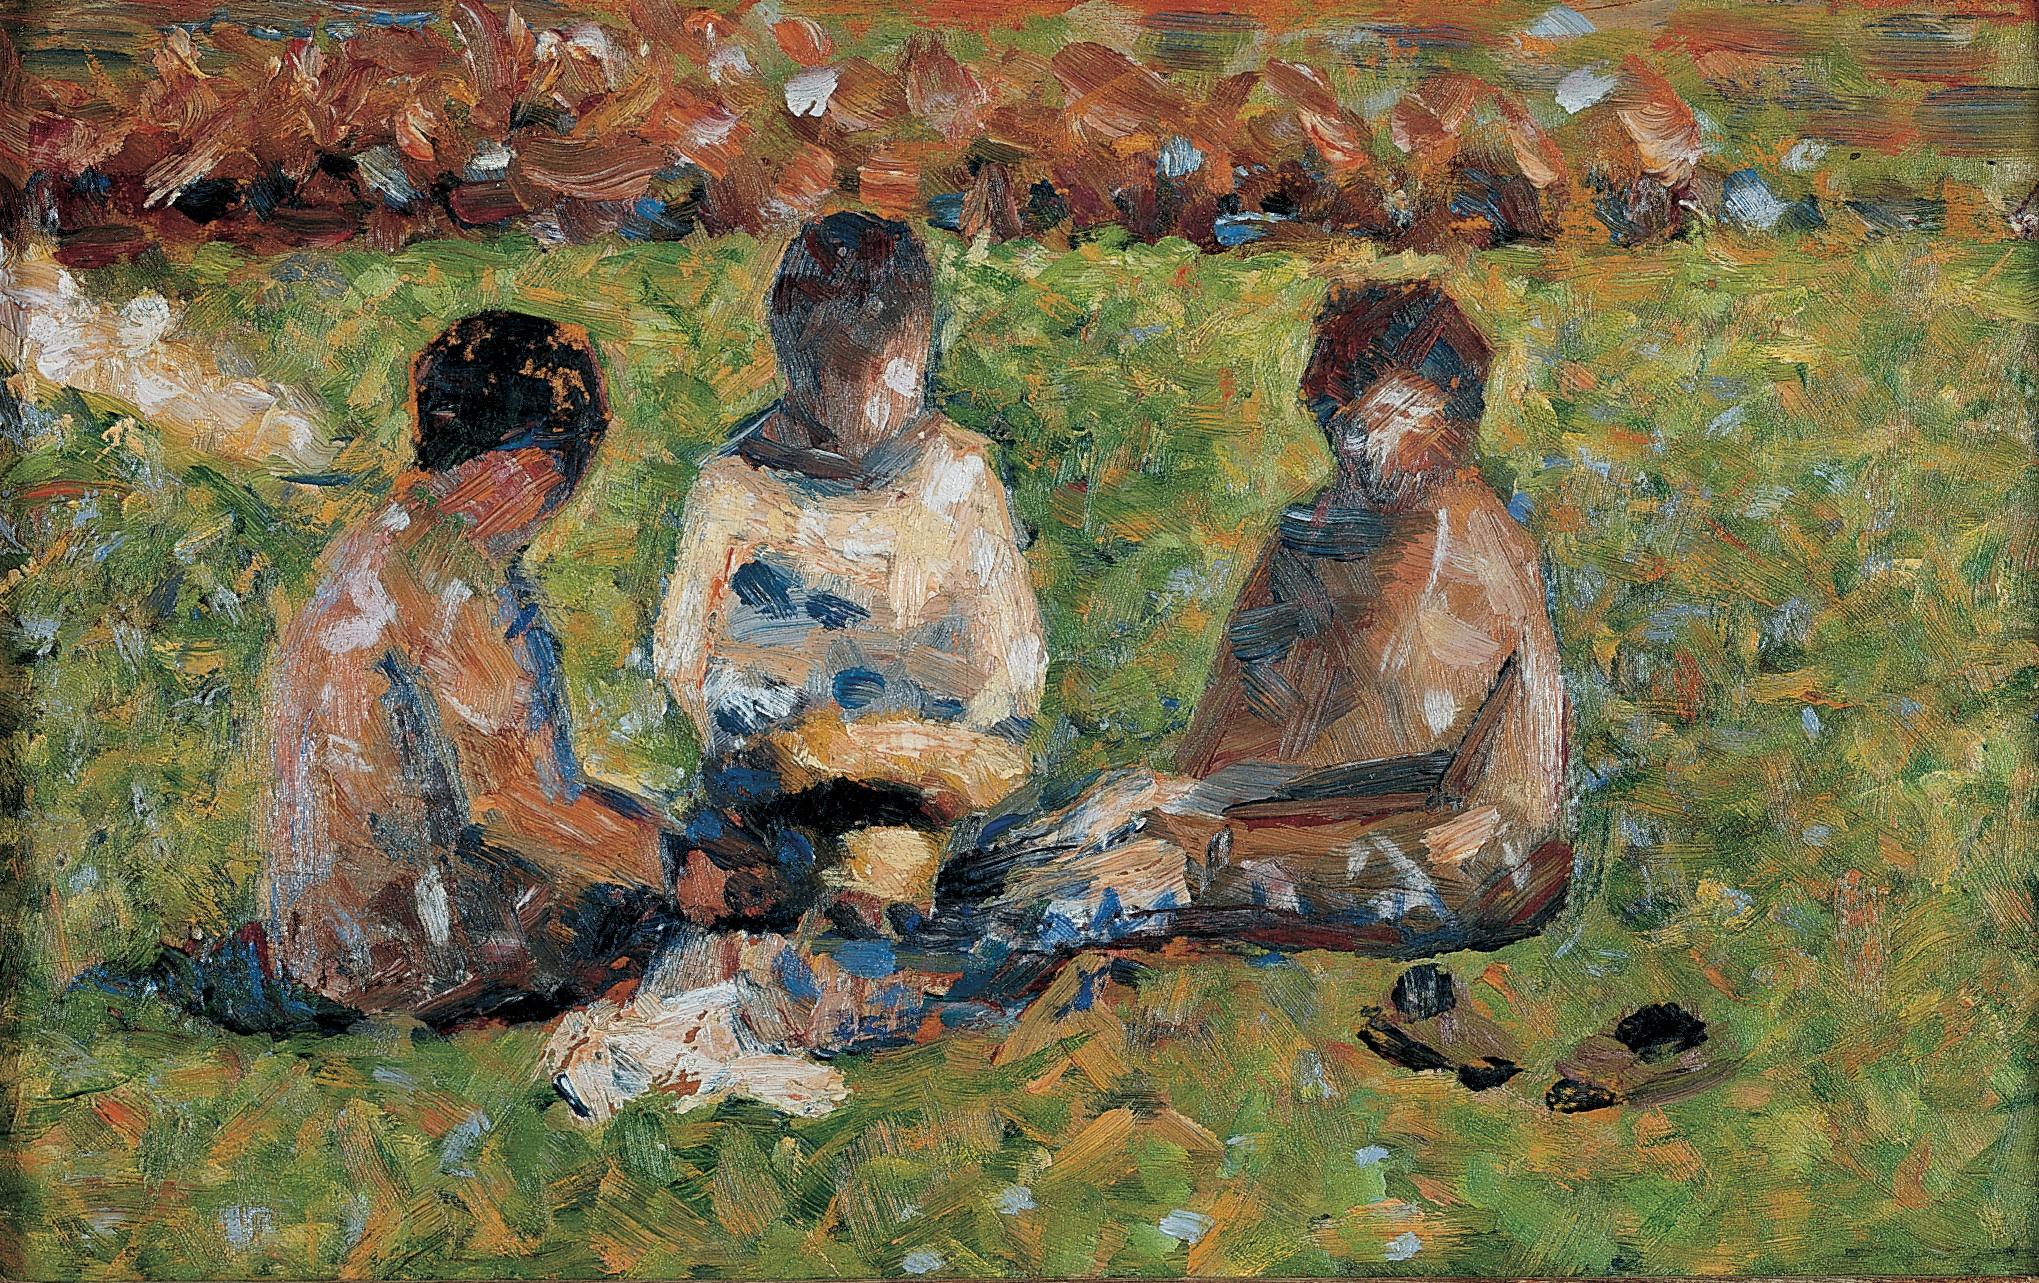 The Picnic by Georges Seurat - ca. 1885 - 6 1/4 x 10 in Dixon Gallery and Gardens